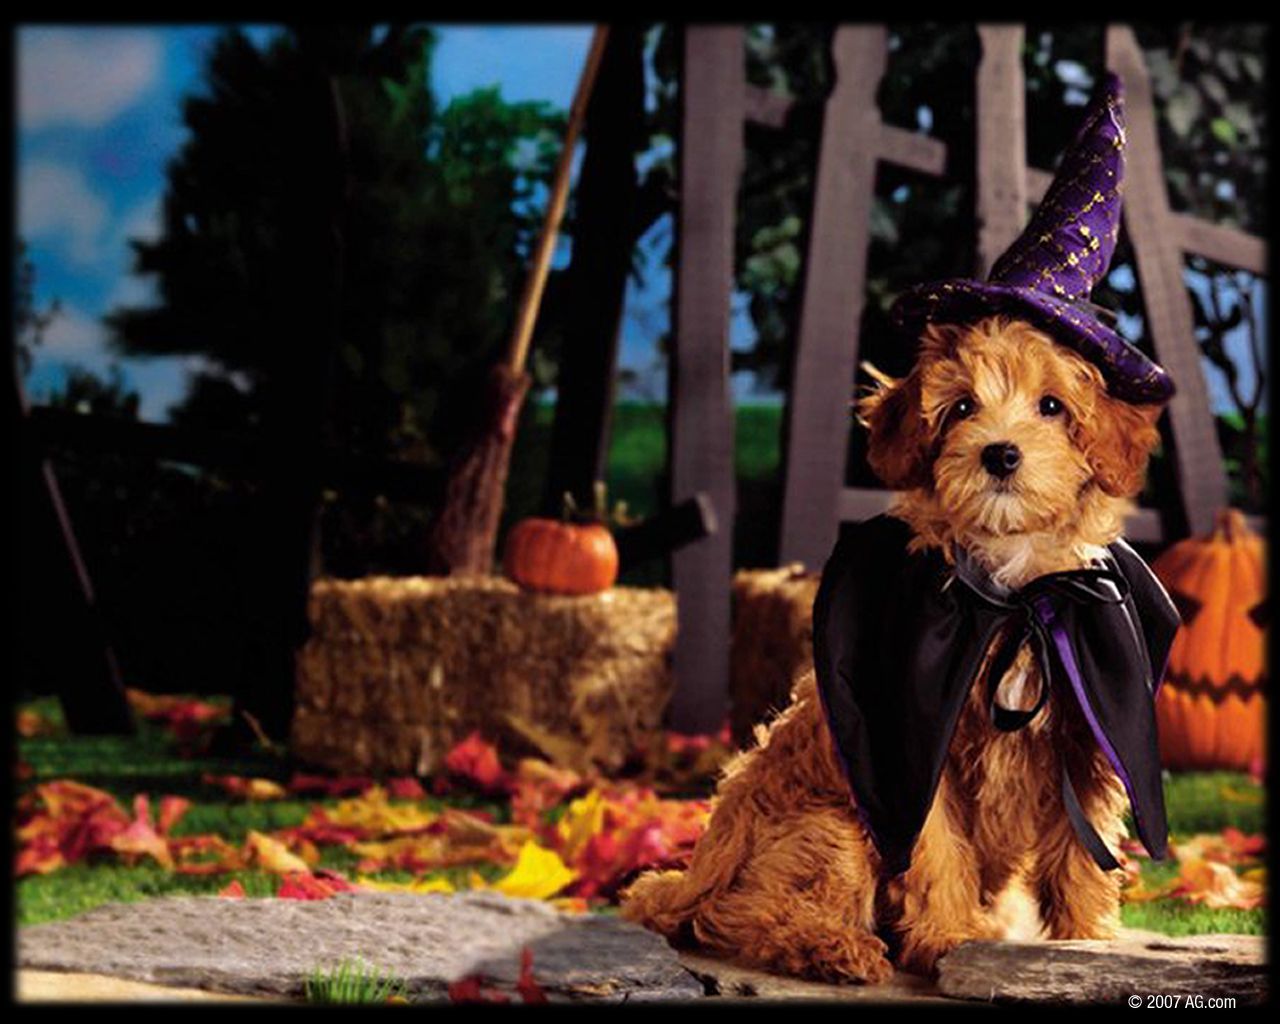 Movies for halloween Funny, Scary & Artistic Halloween Wallpaper. Dog halloween, Halloween puppy, Animal lover